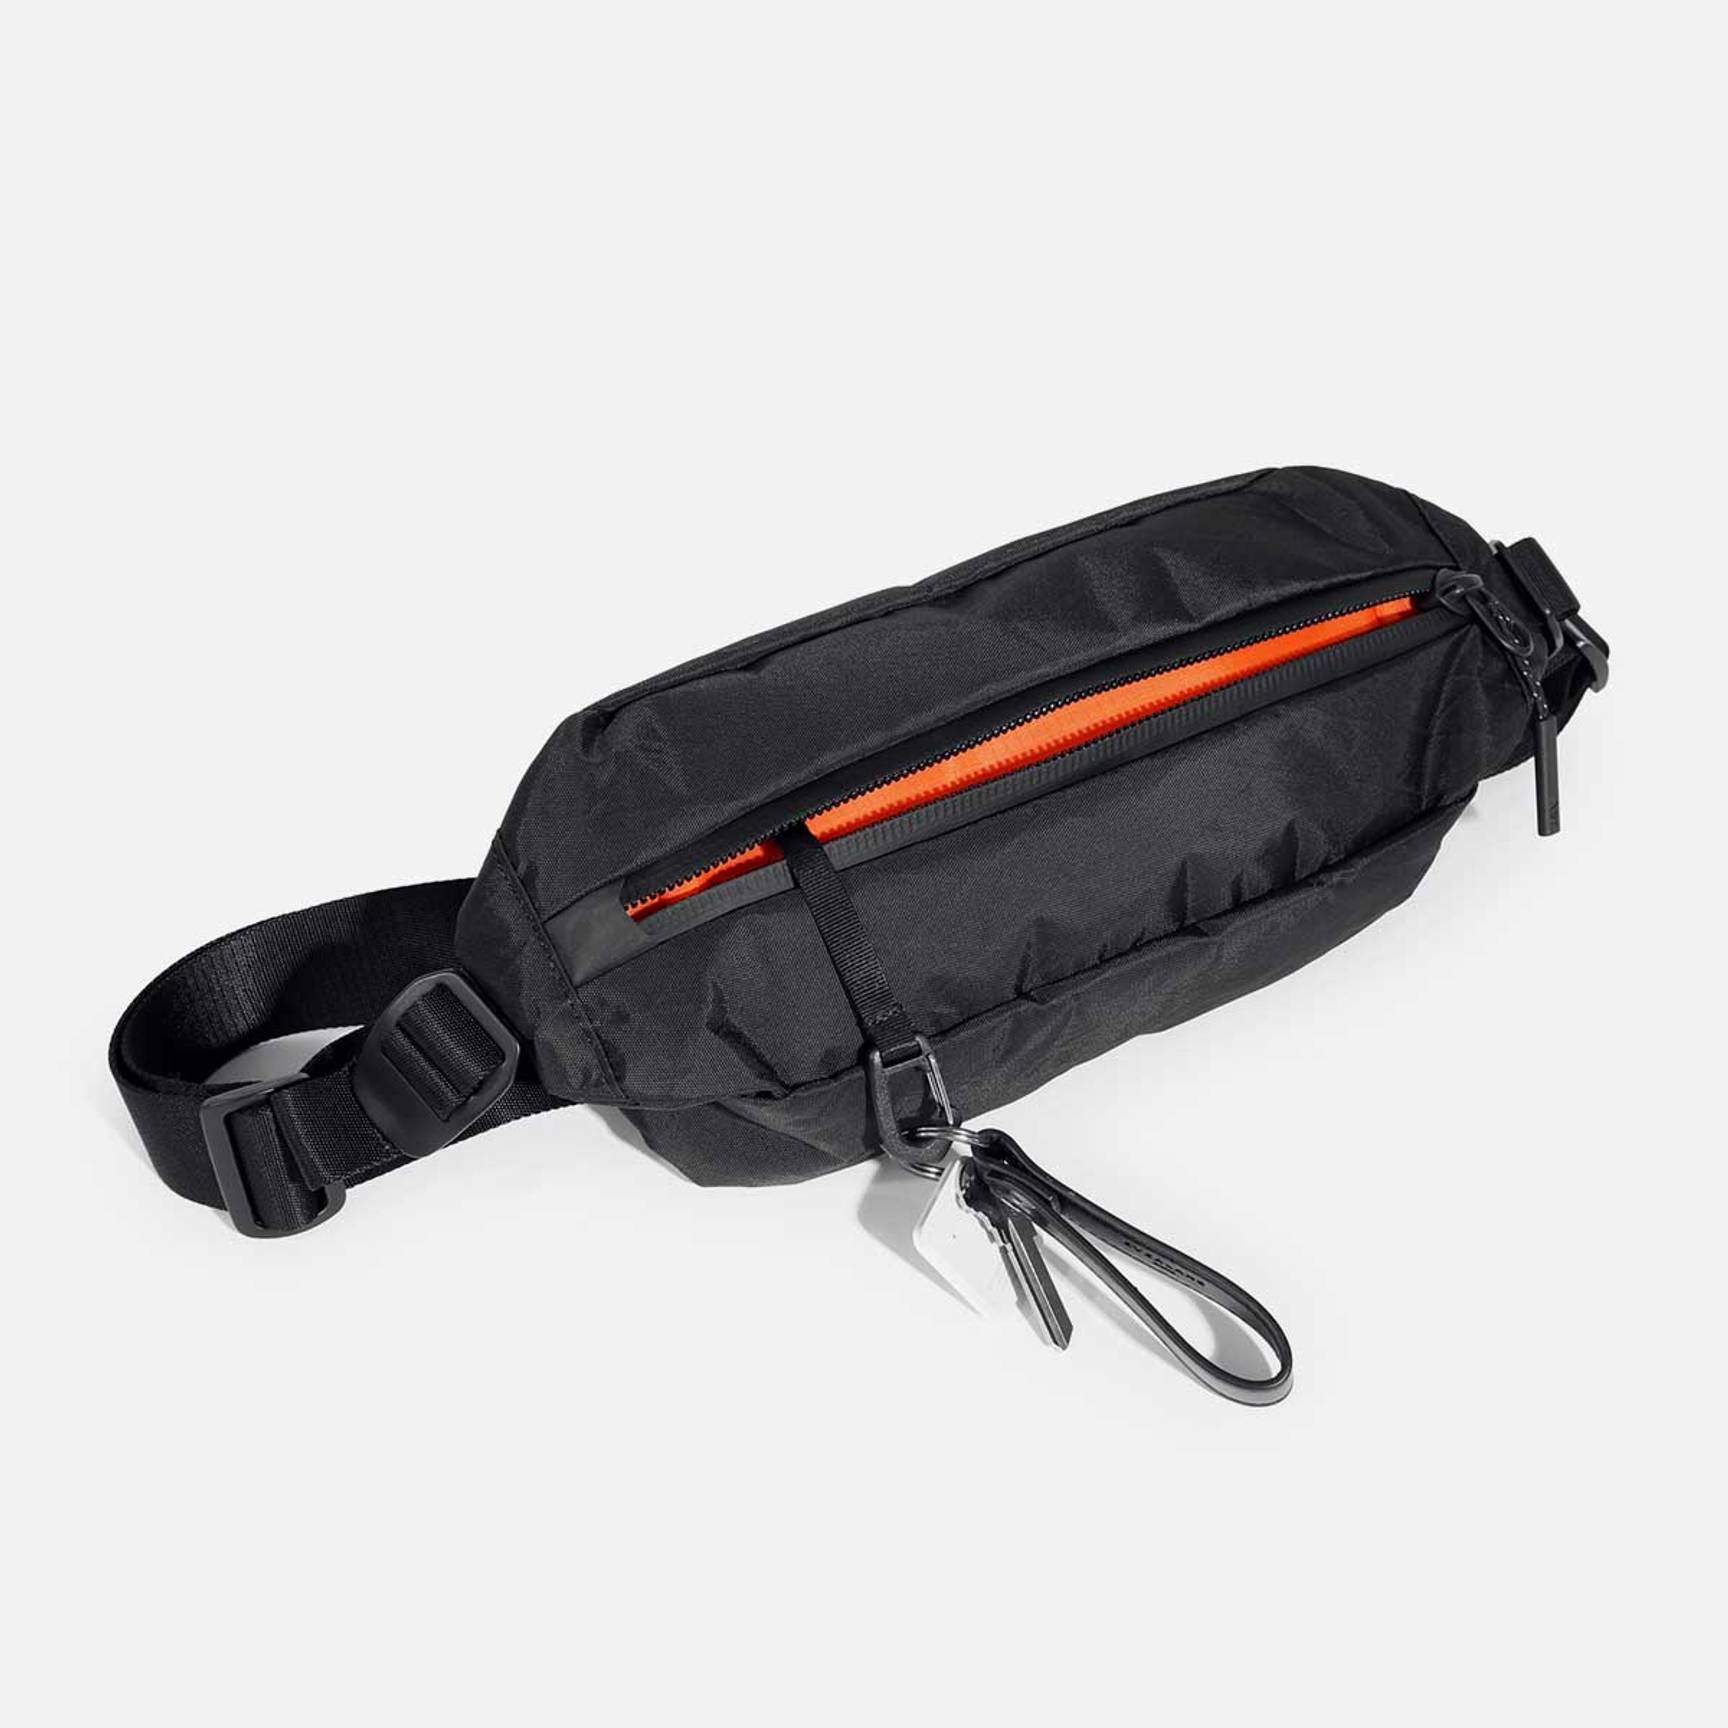 Aer City Sling 2 X-Pac - バッグ